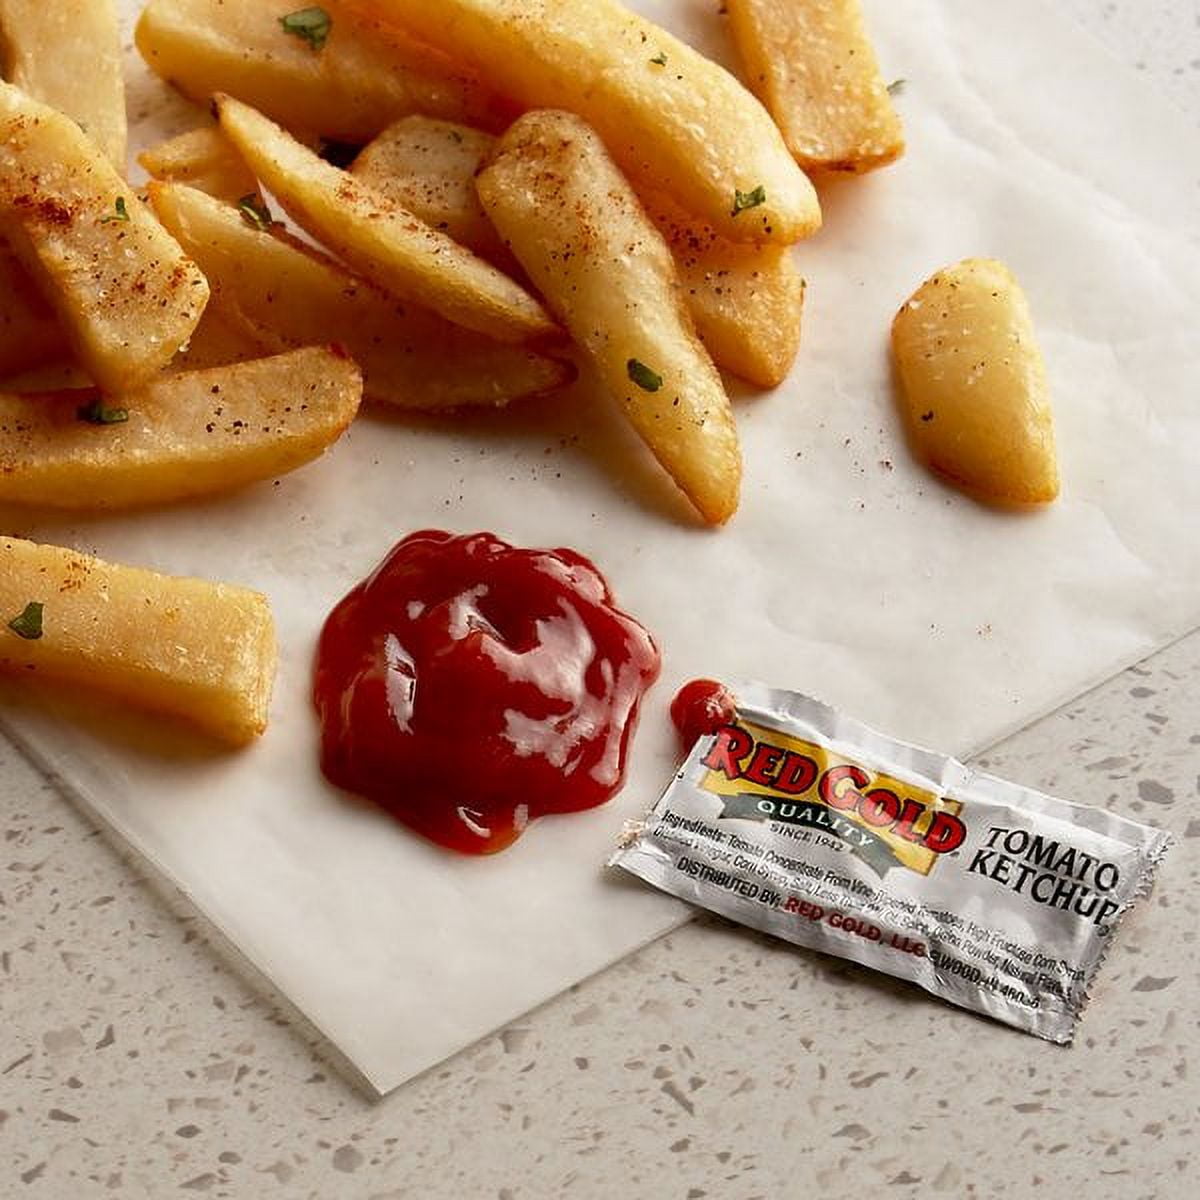 Red Gold 9 Gram Ketchup Packets - 1000/Case